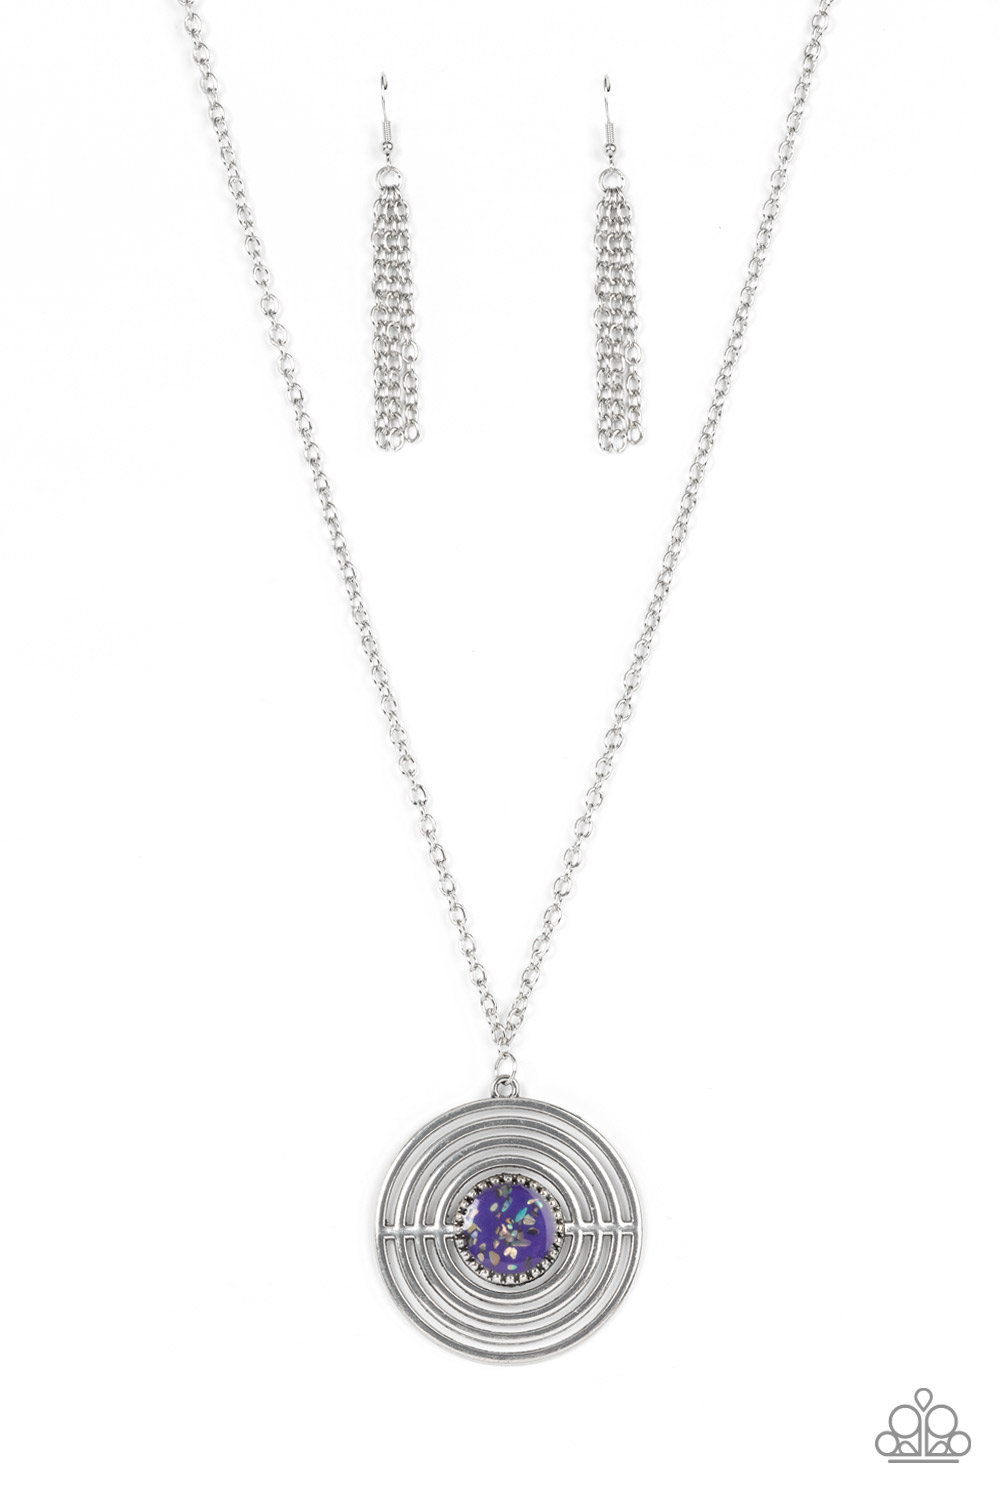 Necklace - Targeted Tranquility - Purple